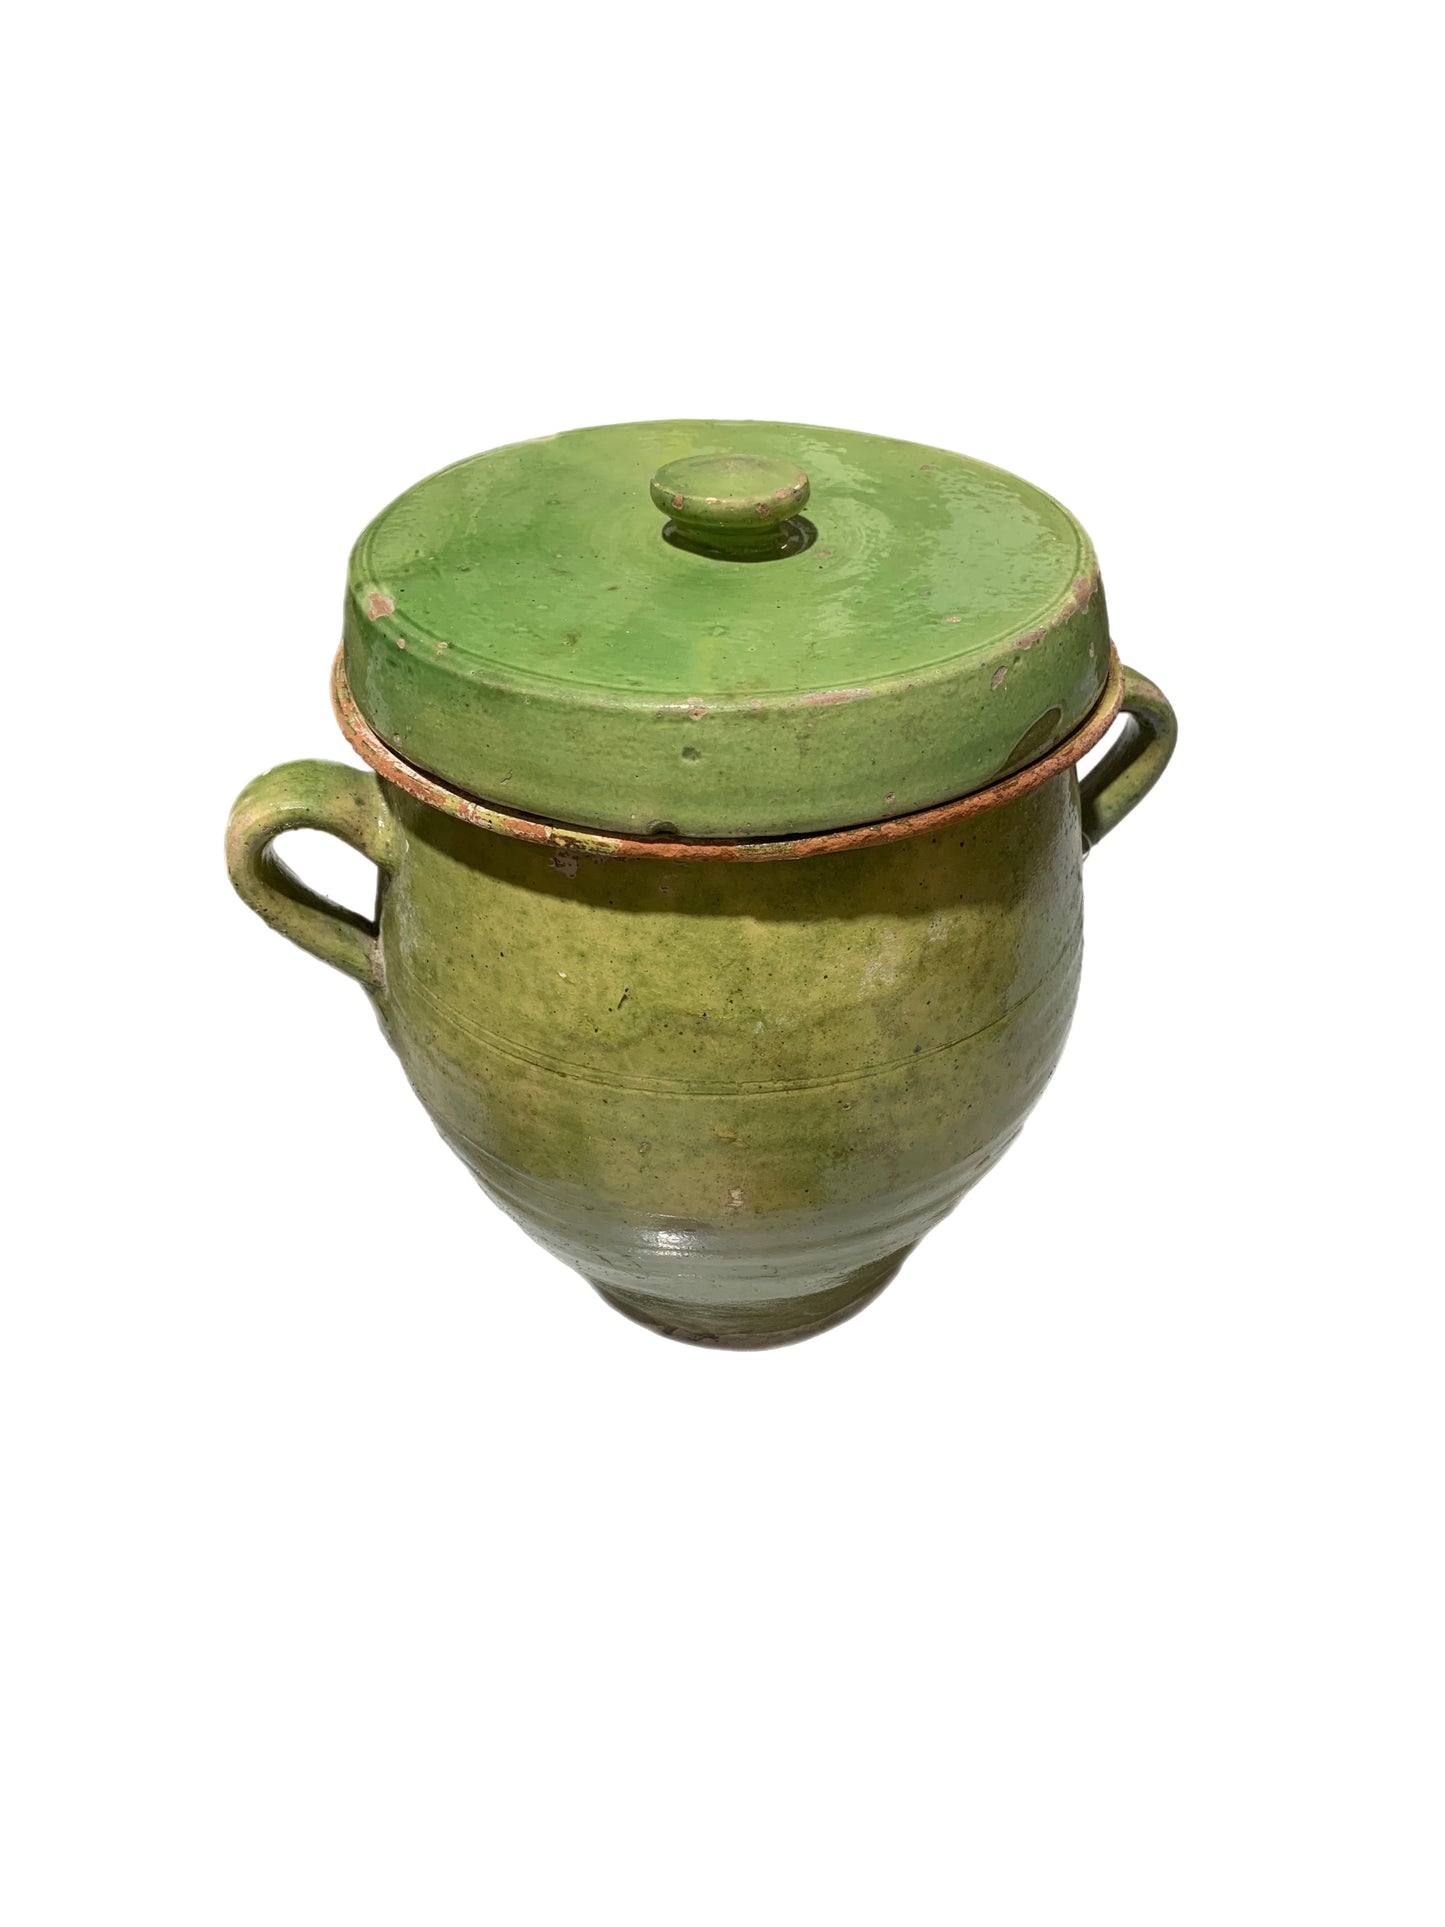 19th Century Green Glazed and Lidded Confit Pot from Savoie, France